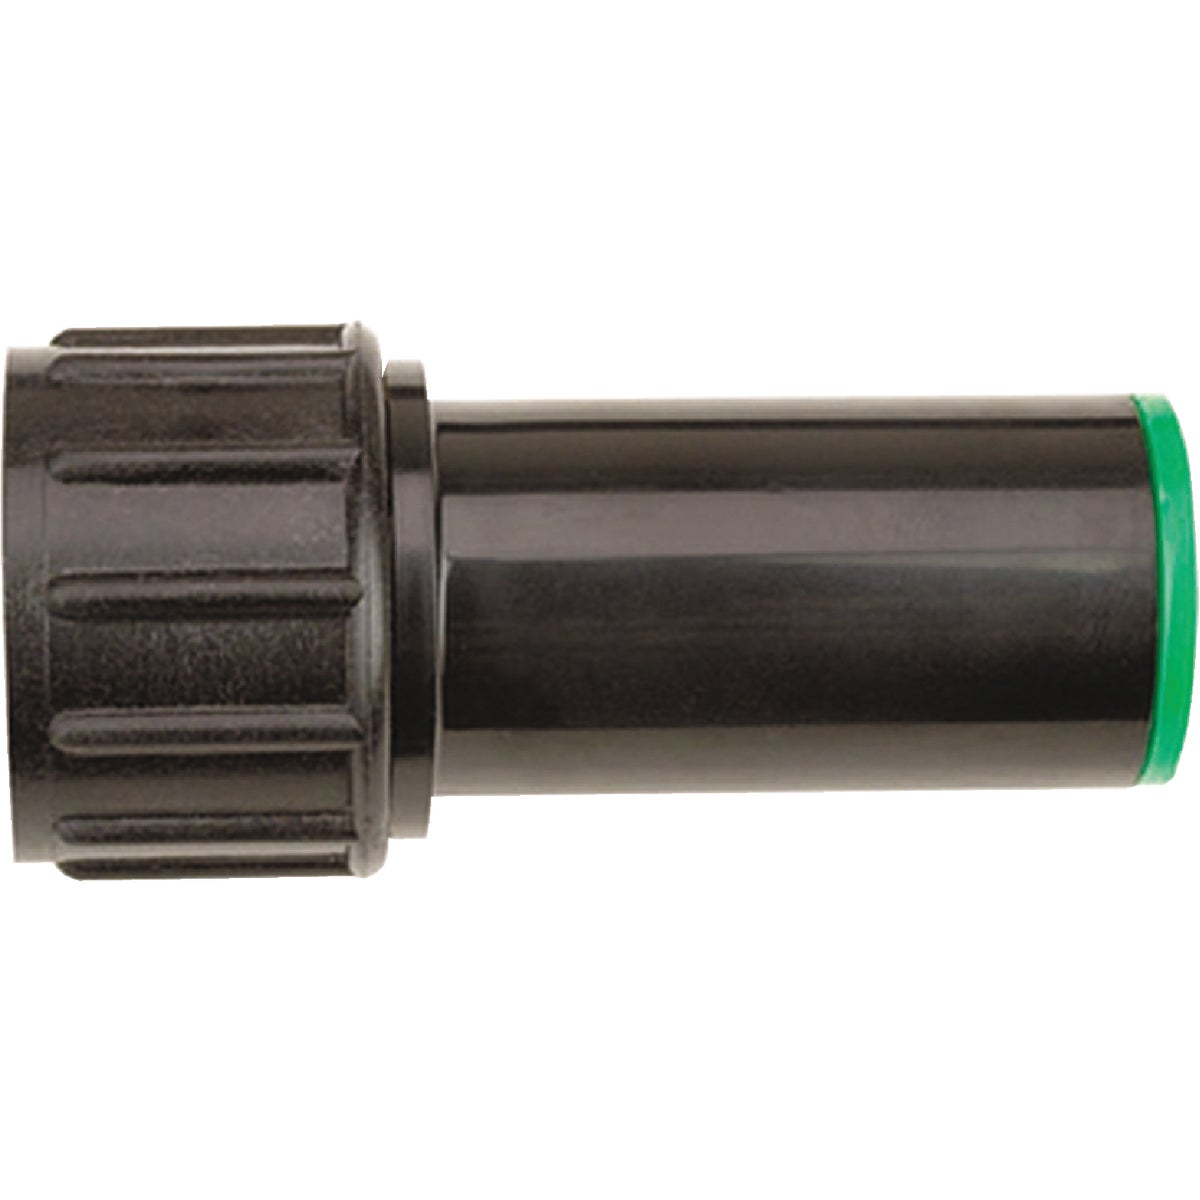 Item 729671, Hose plug. Closes off ends of hose and allows for flushing.